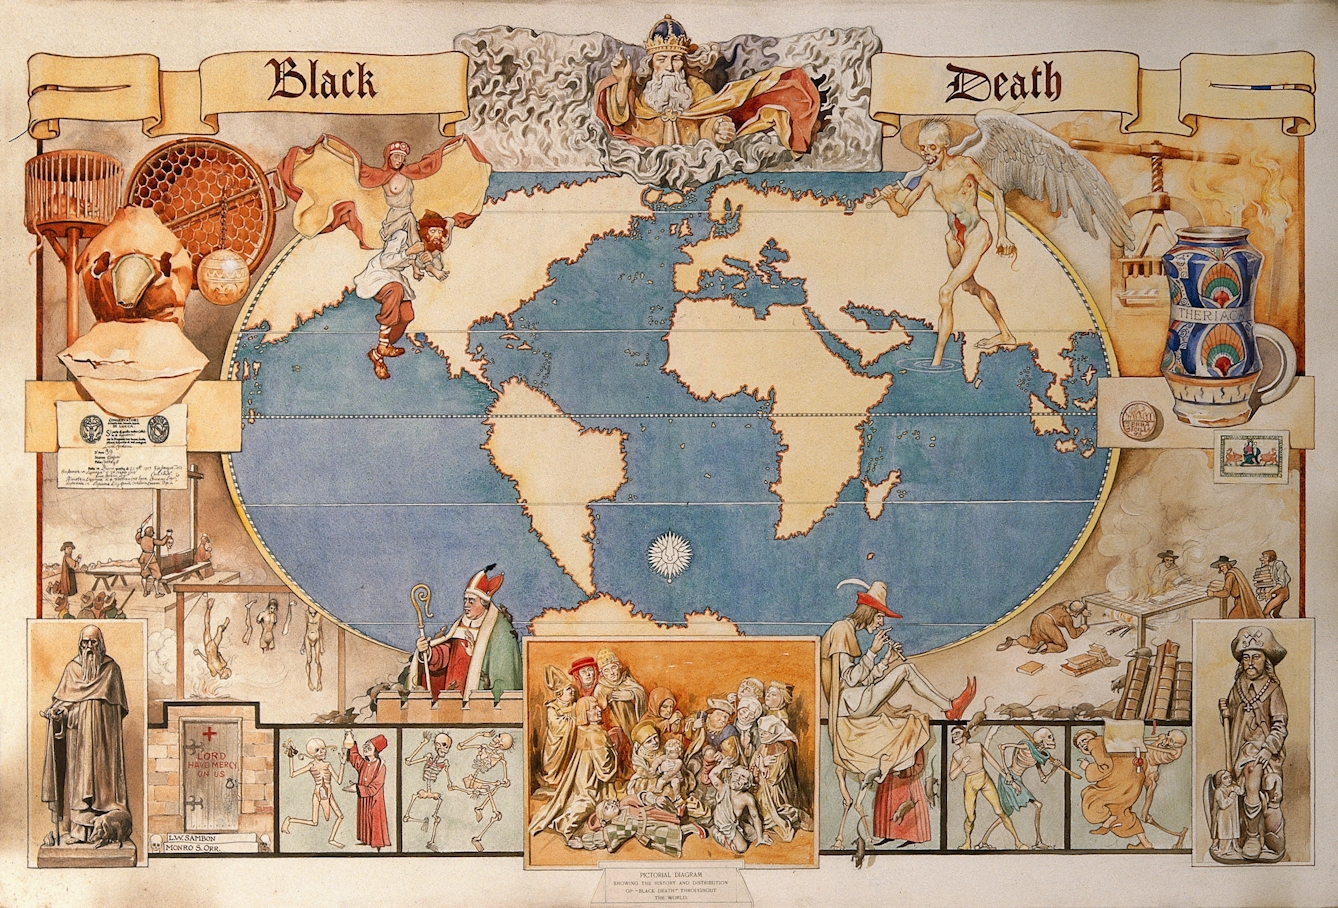 Watercolour map showing the history and distribution of the black death around the world